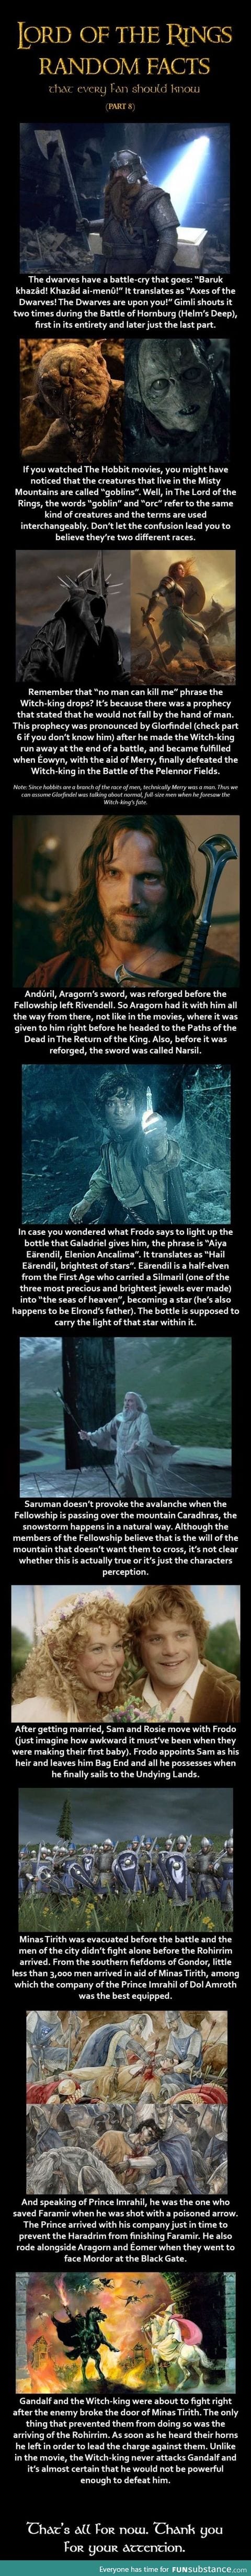 Lord of the Ring facts